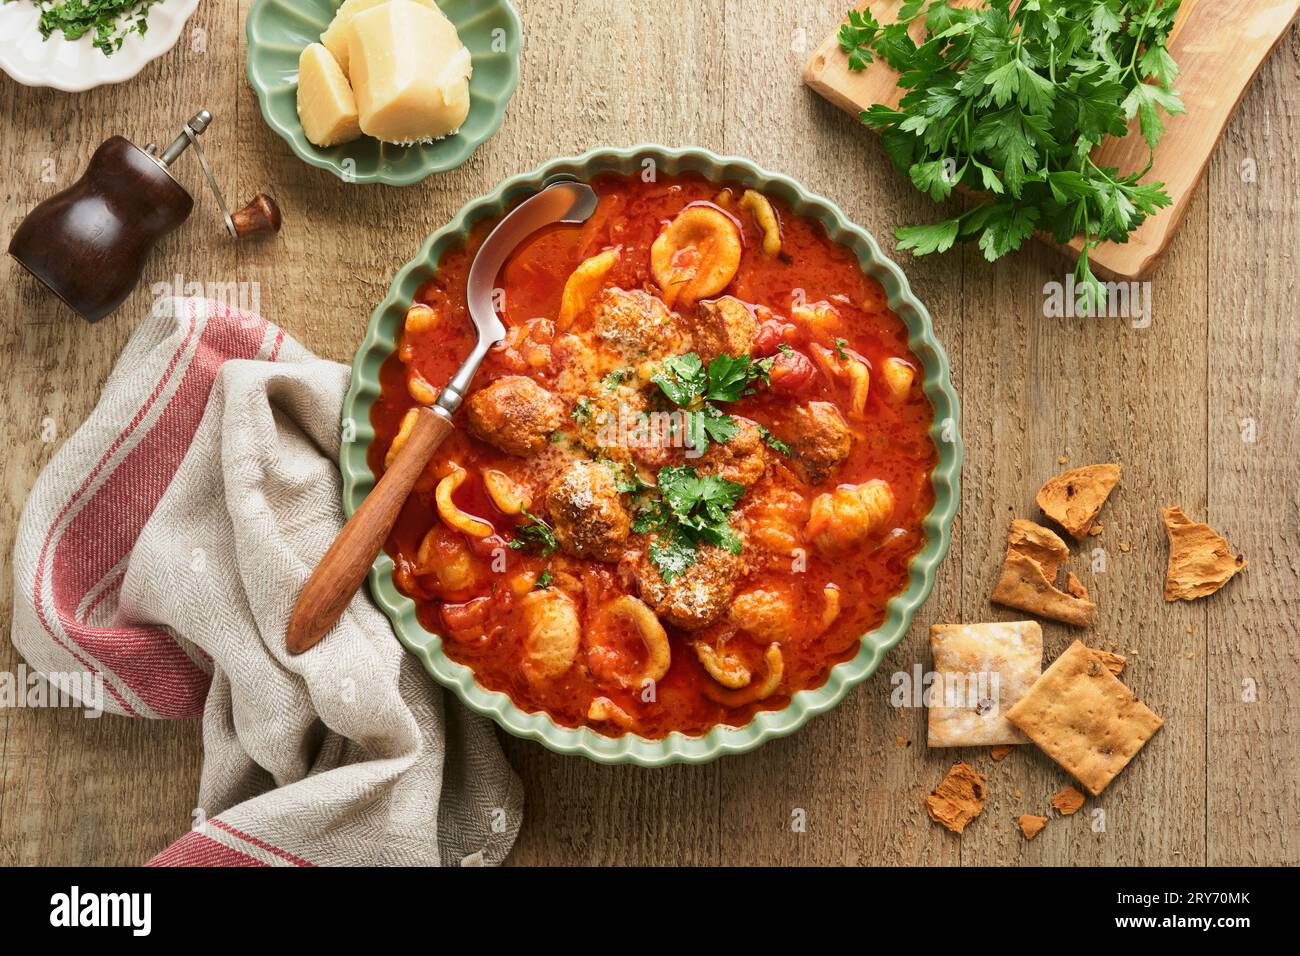 Soup. Fresh tomato soup with meatballs, pasta, vegetables and parsley in green rustic bowl on wooden background. Traditional Italian cuisine. Healthy Stock Photo